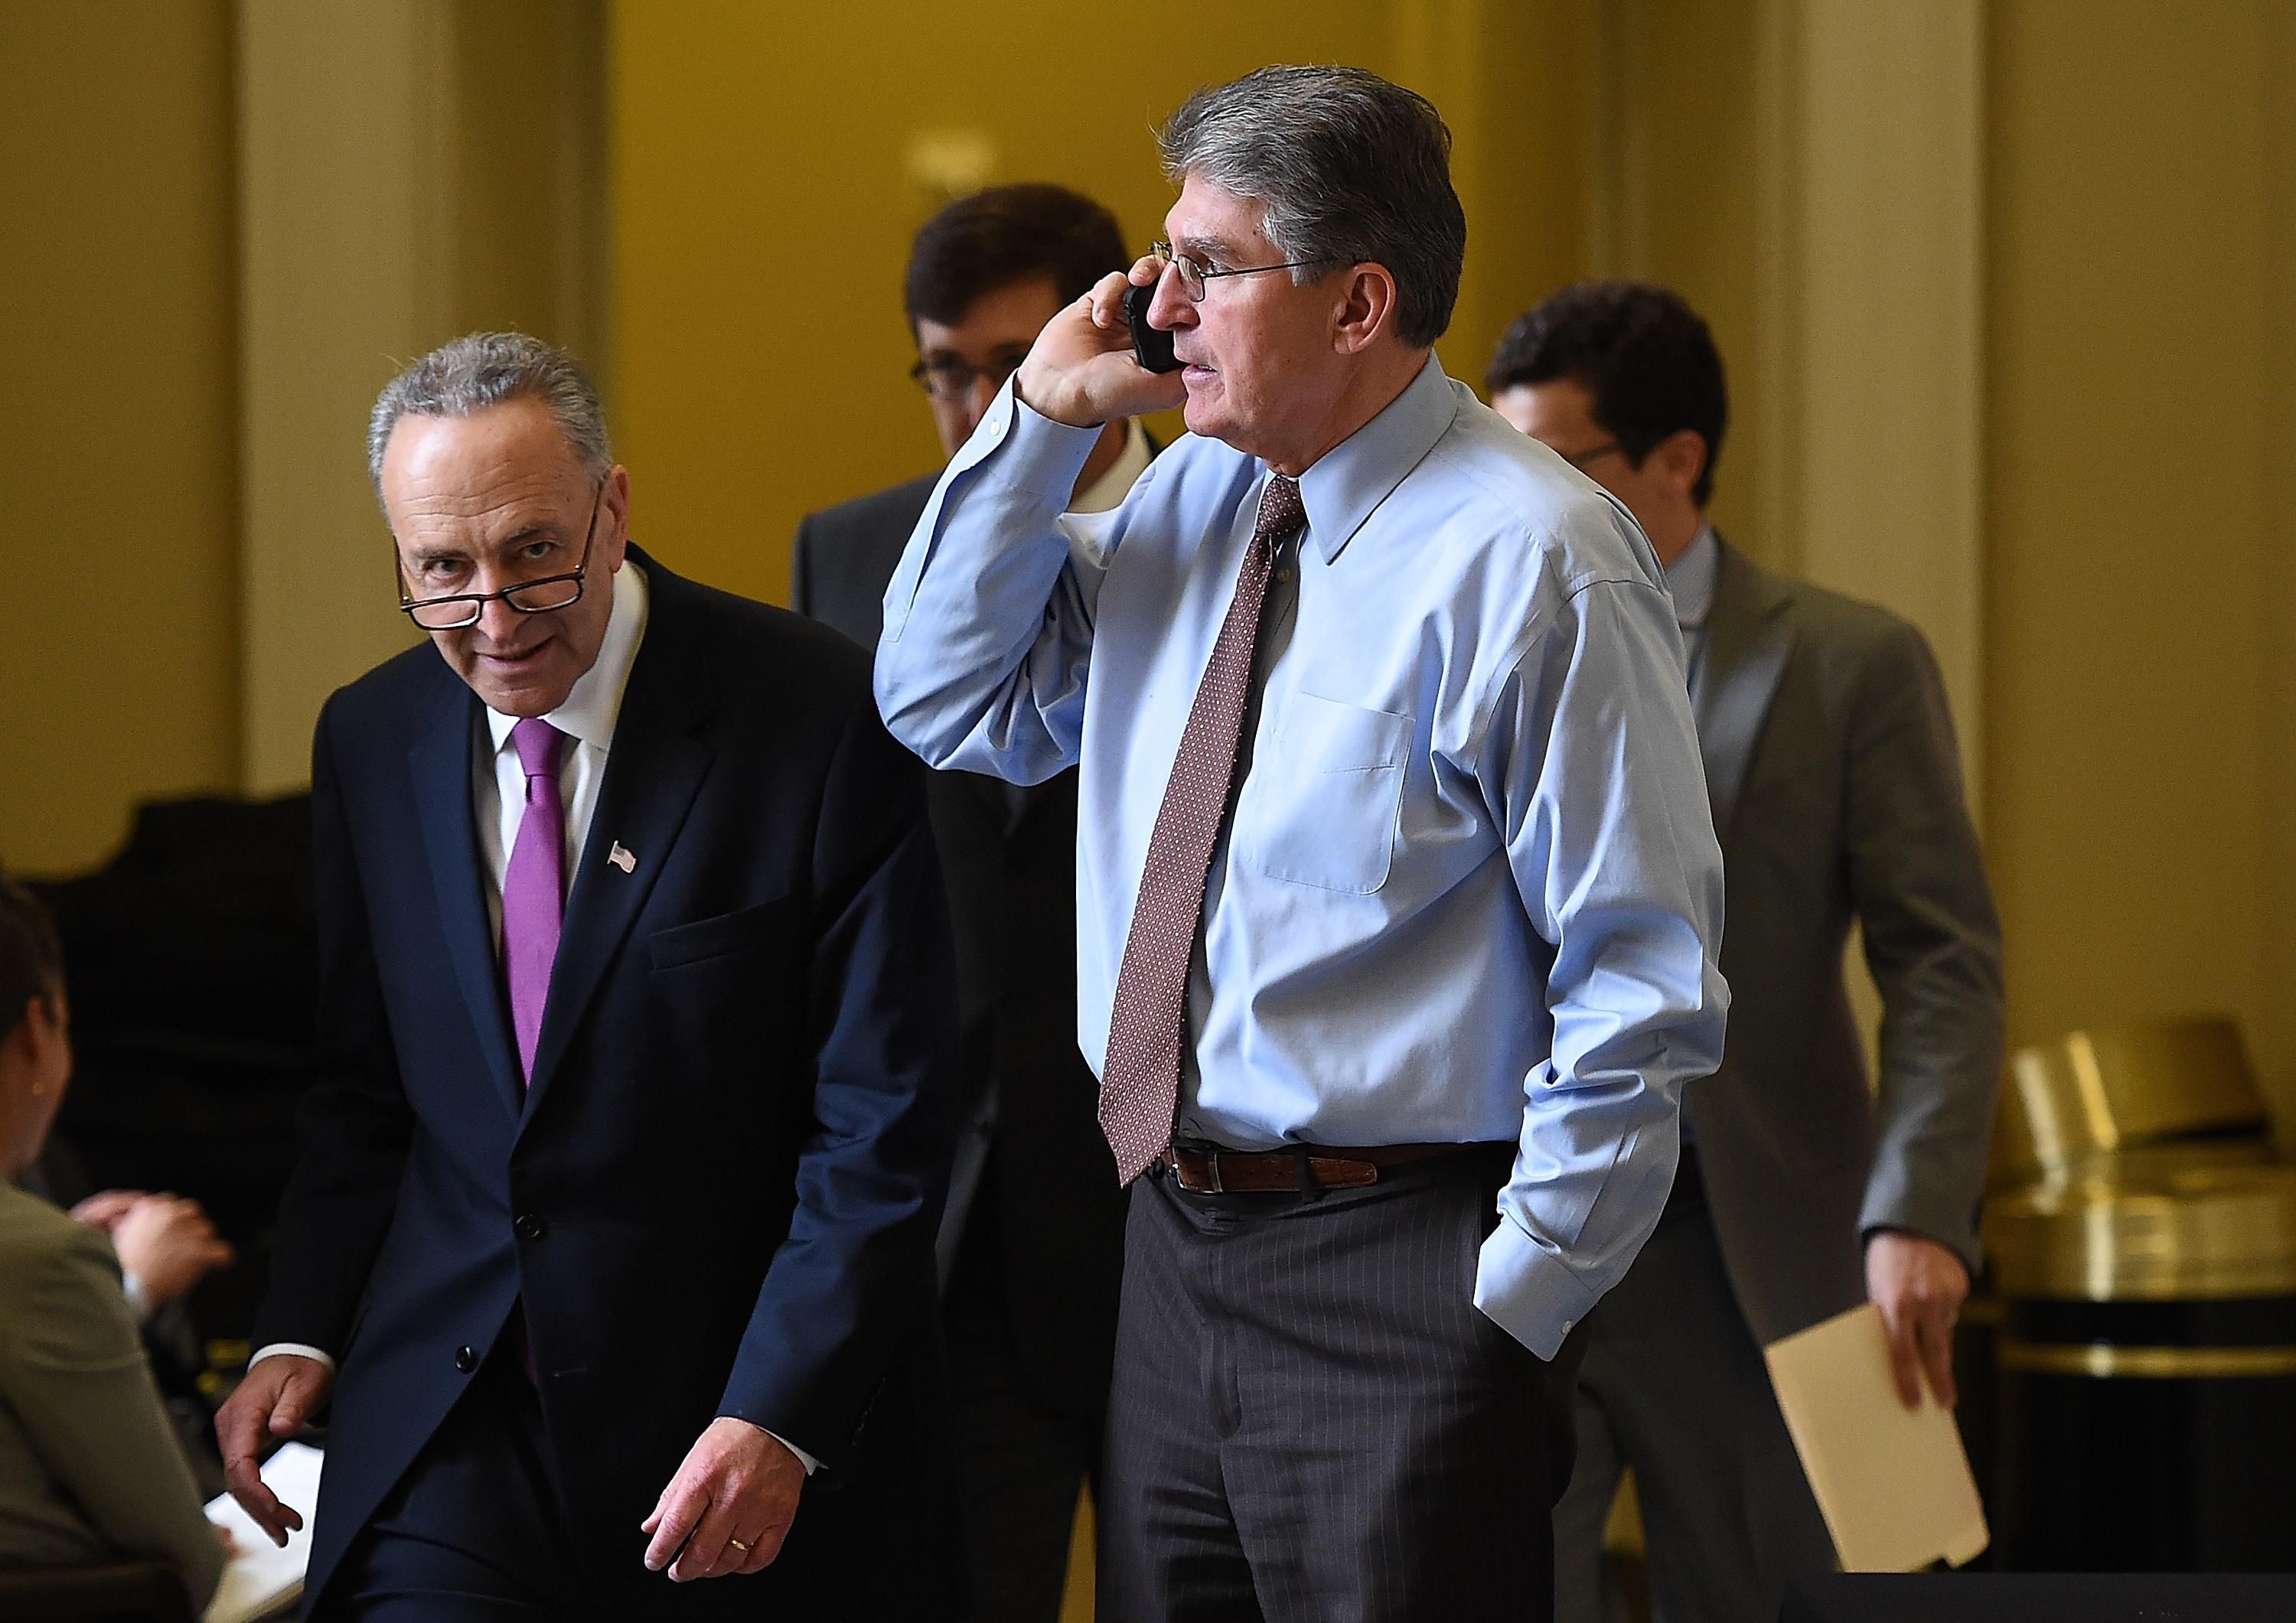 Schumer passes Manchin as he speaks on the phone